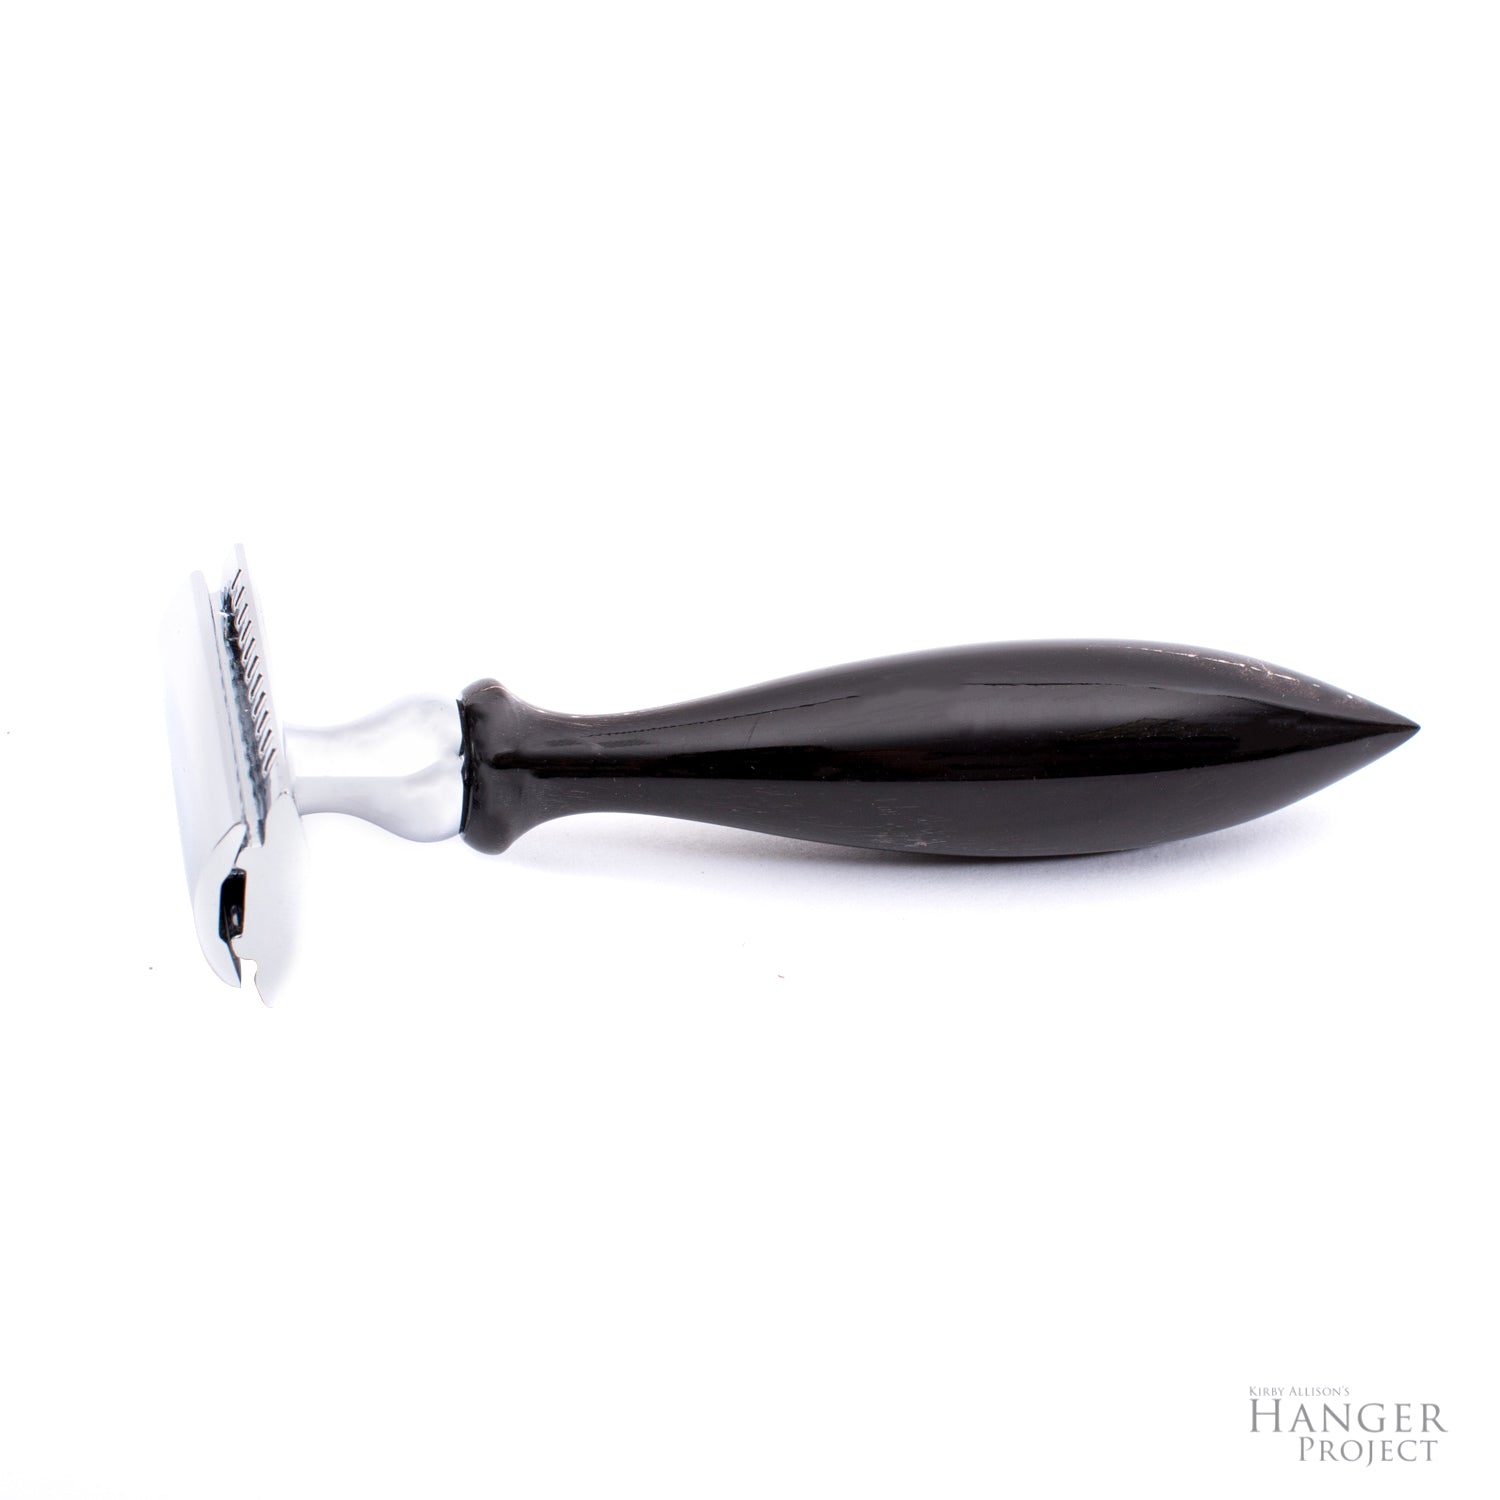 A black and white Parker 3-Piece Horn Safety Razor from KirbyAllison.com on a white background.